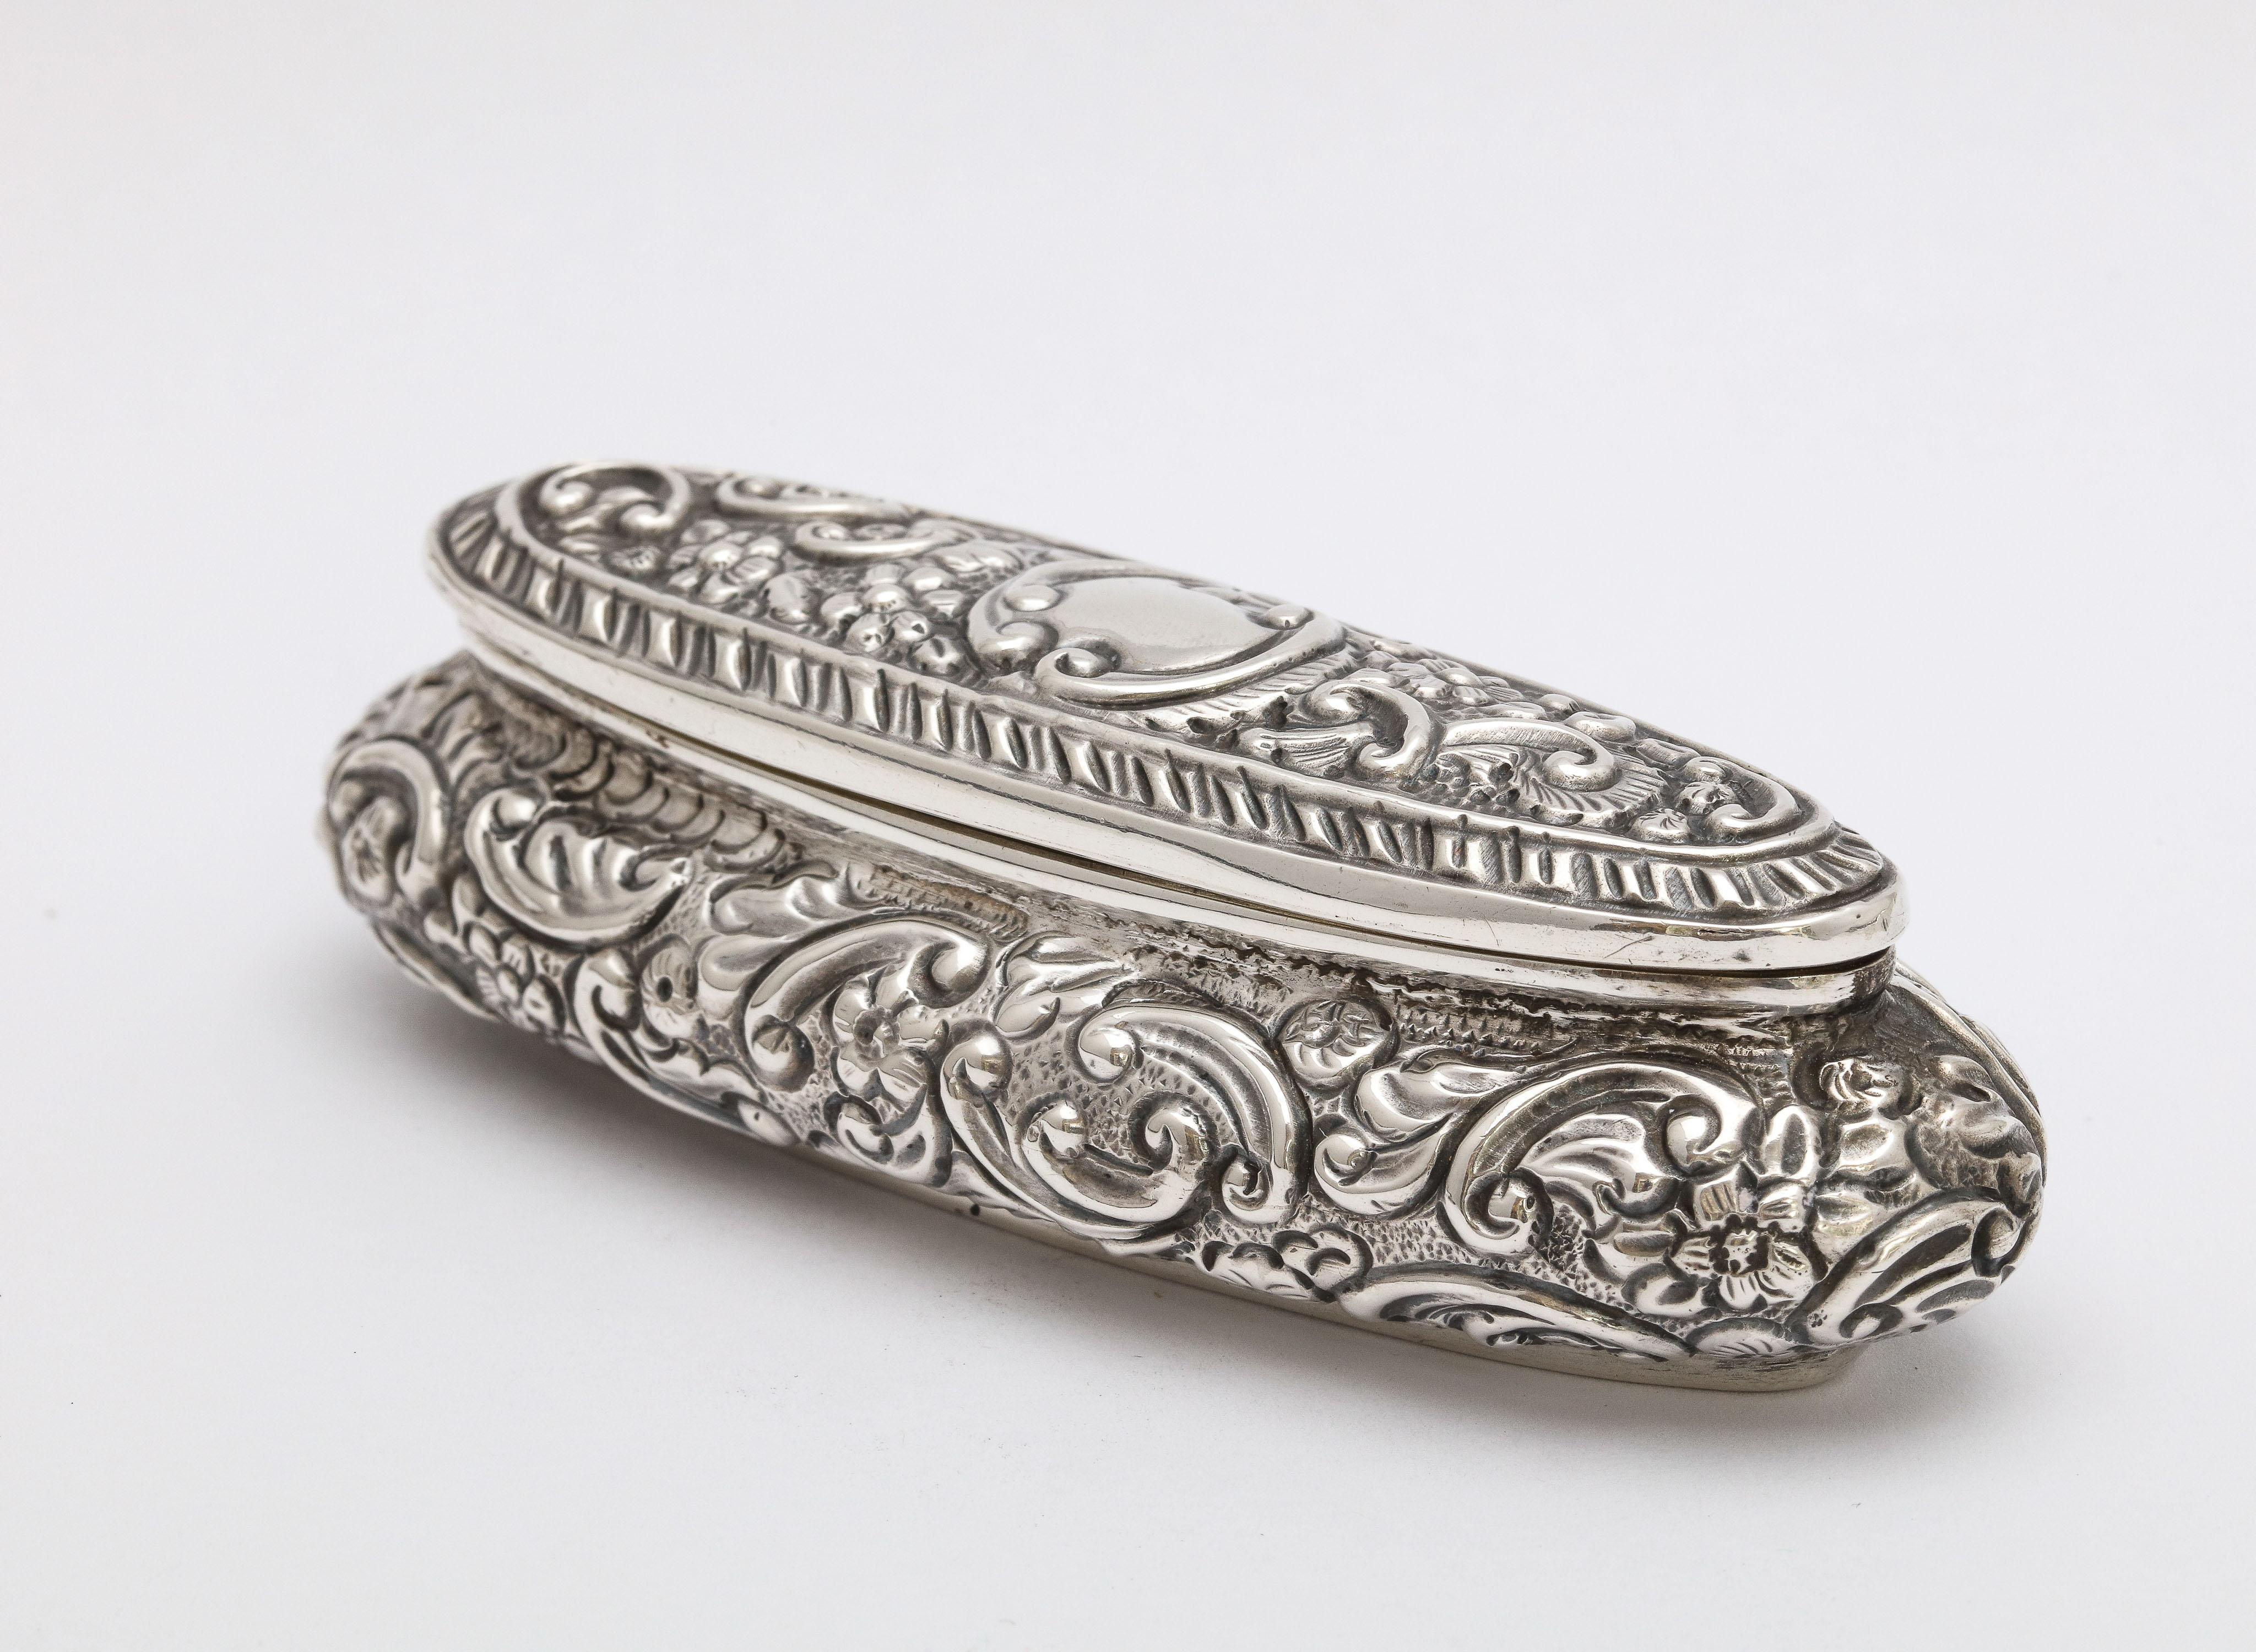 Edwardian Period Sterling Silver Oval Trinkets Box with Hinged Lid 1